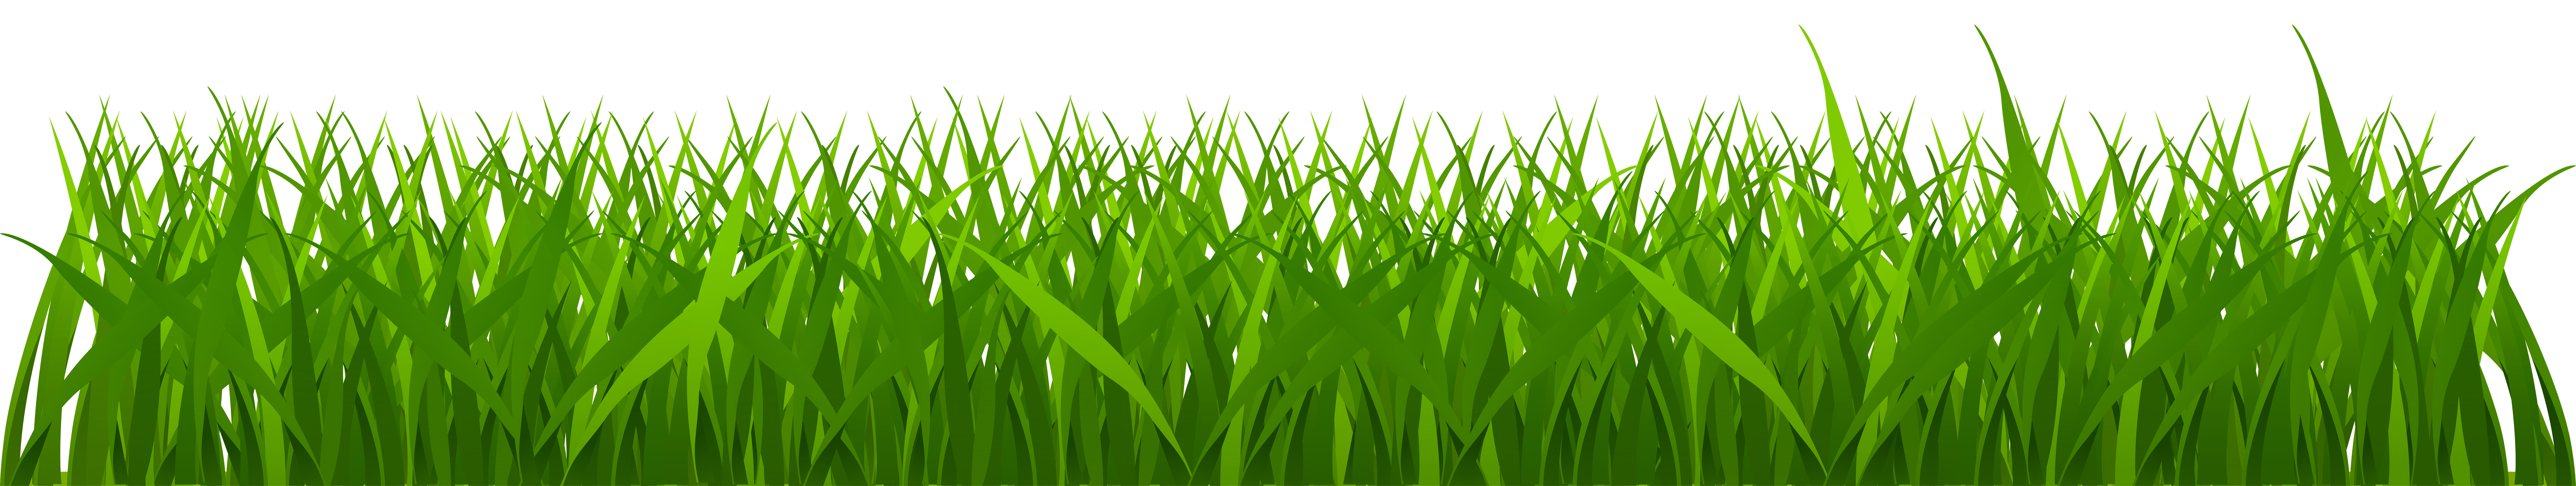 png clipart grass - photo #15